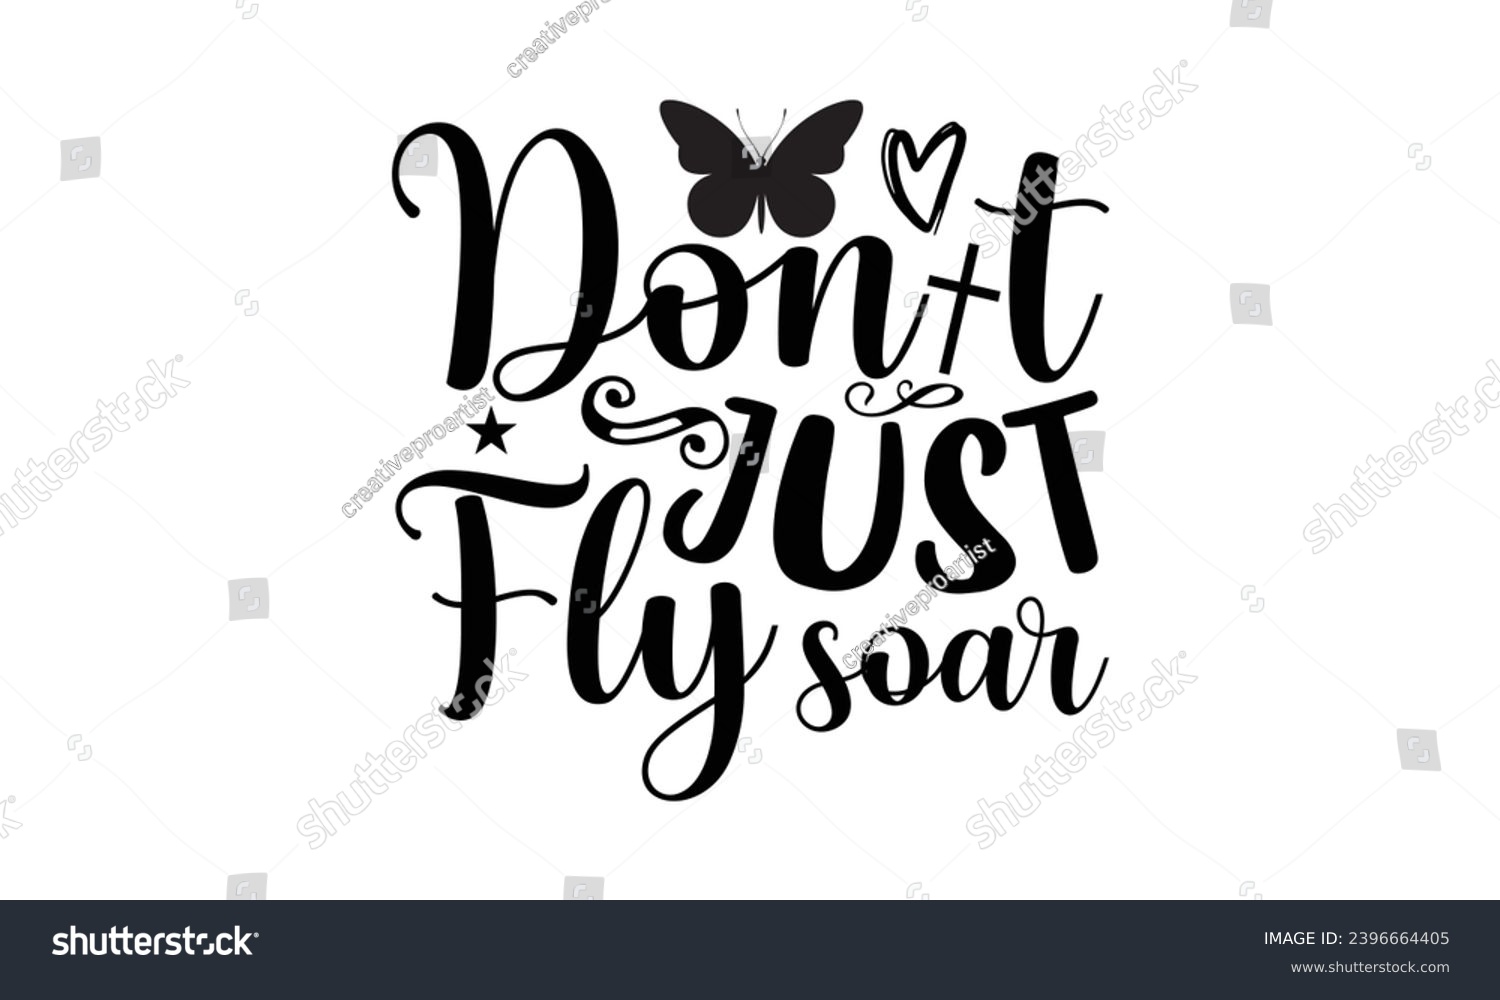 SVG of Don T Just Fly Soar- Butterfly t- shirt design, Handmade calligraphy vector illustration for Cutting Machine, Silhouette Cameo, Cricut, Vector illustration Template eps svg